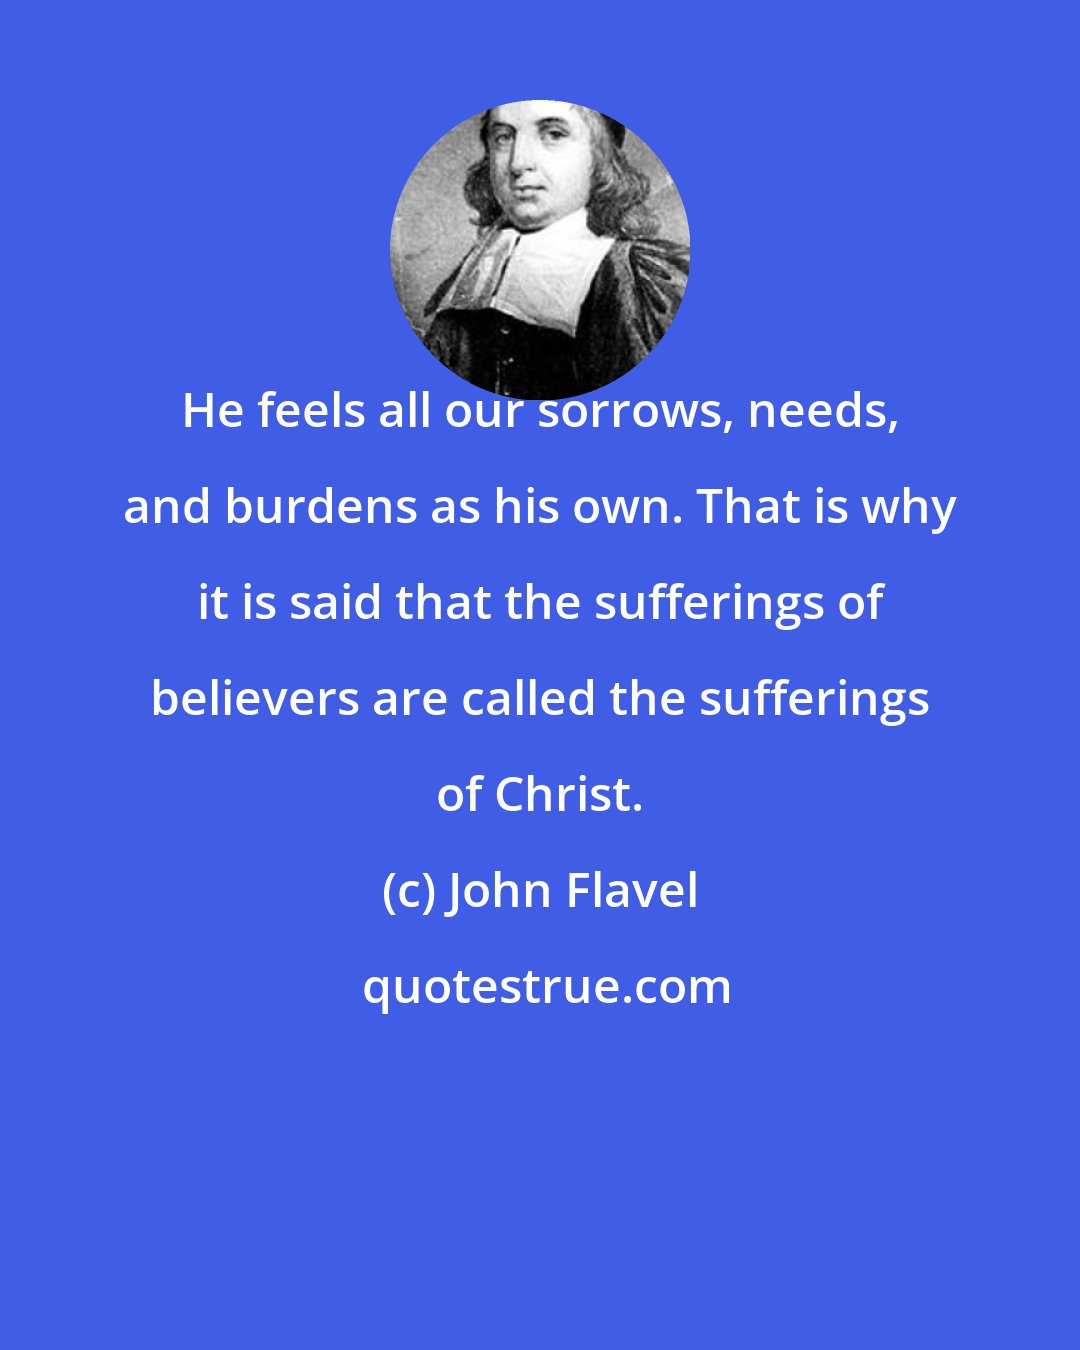 John Flavel: He feels all our sorrows, needs, and burdens as his own. That is why it is said that the sufferings of believers are called the sufferings of Christ.